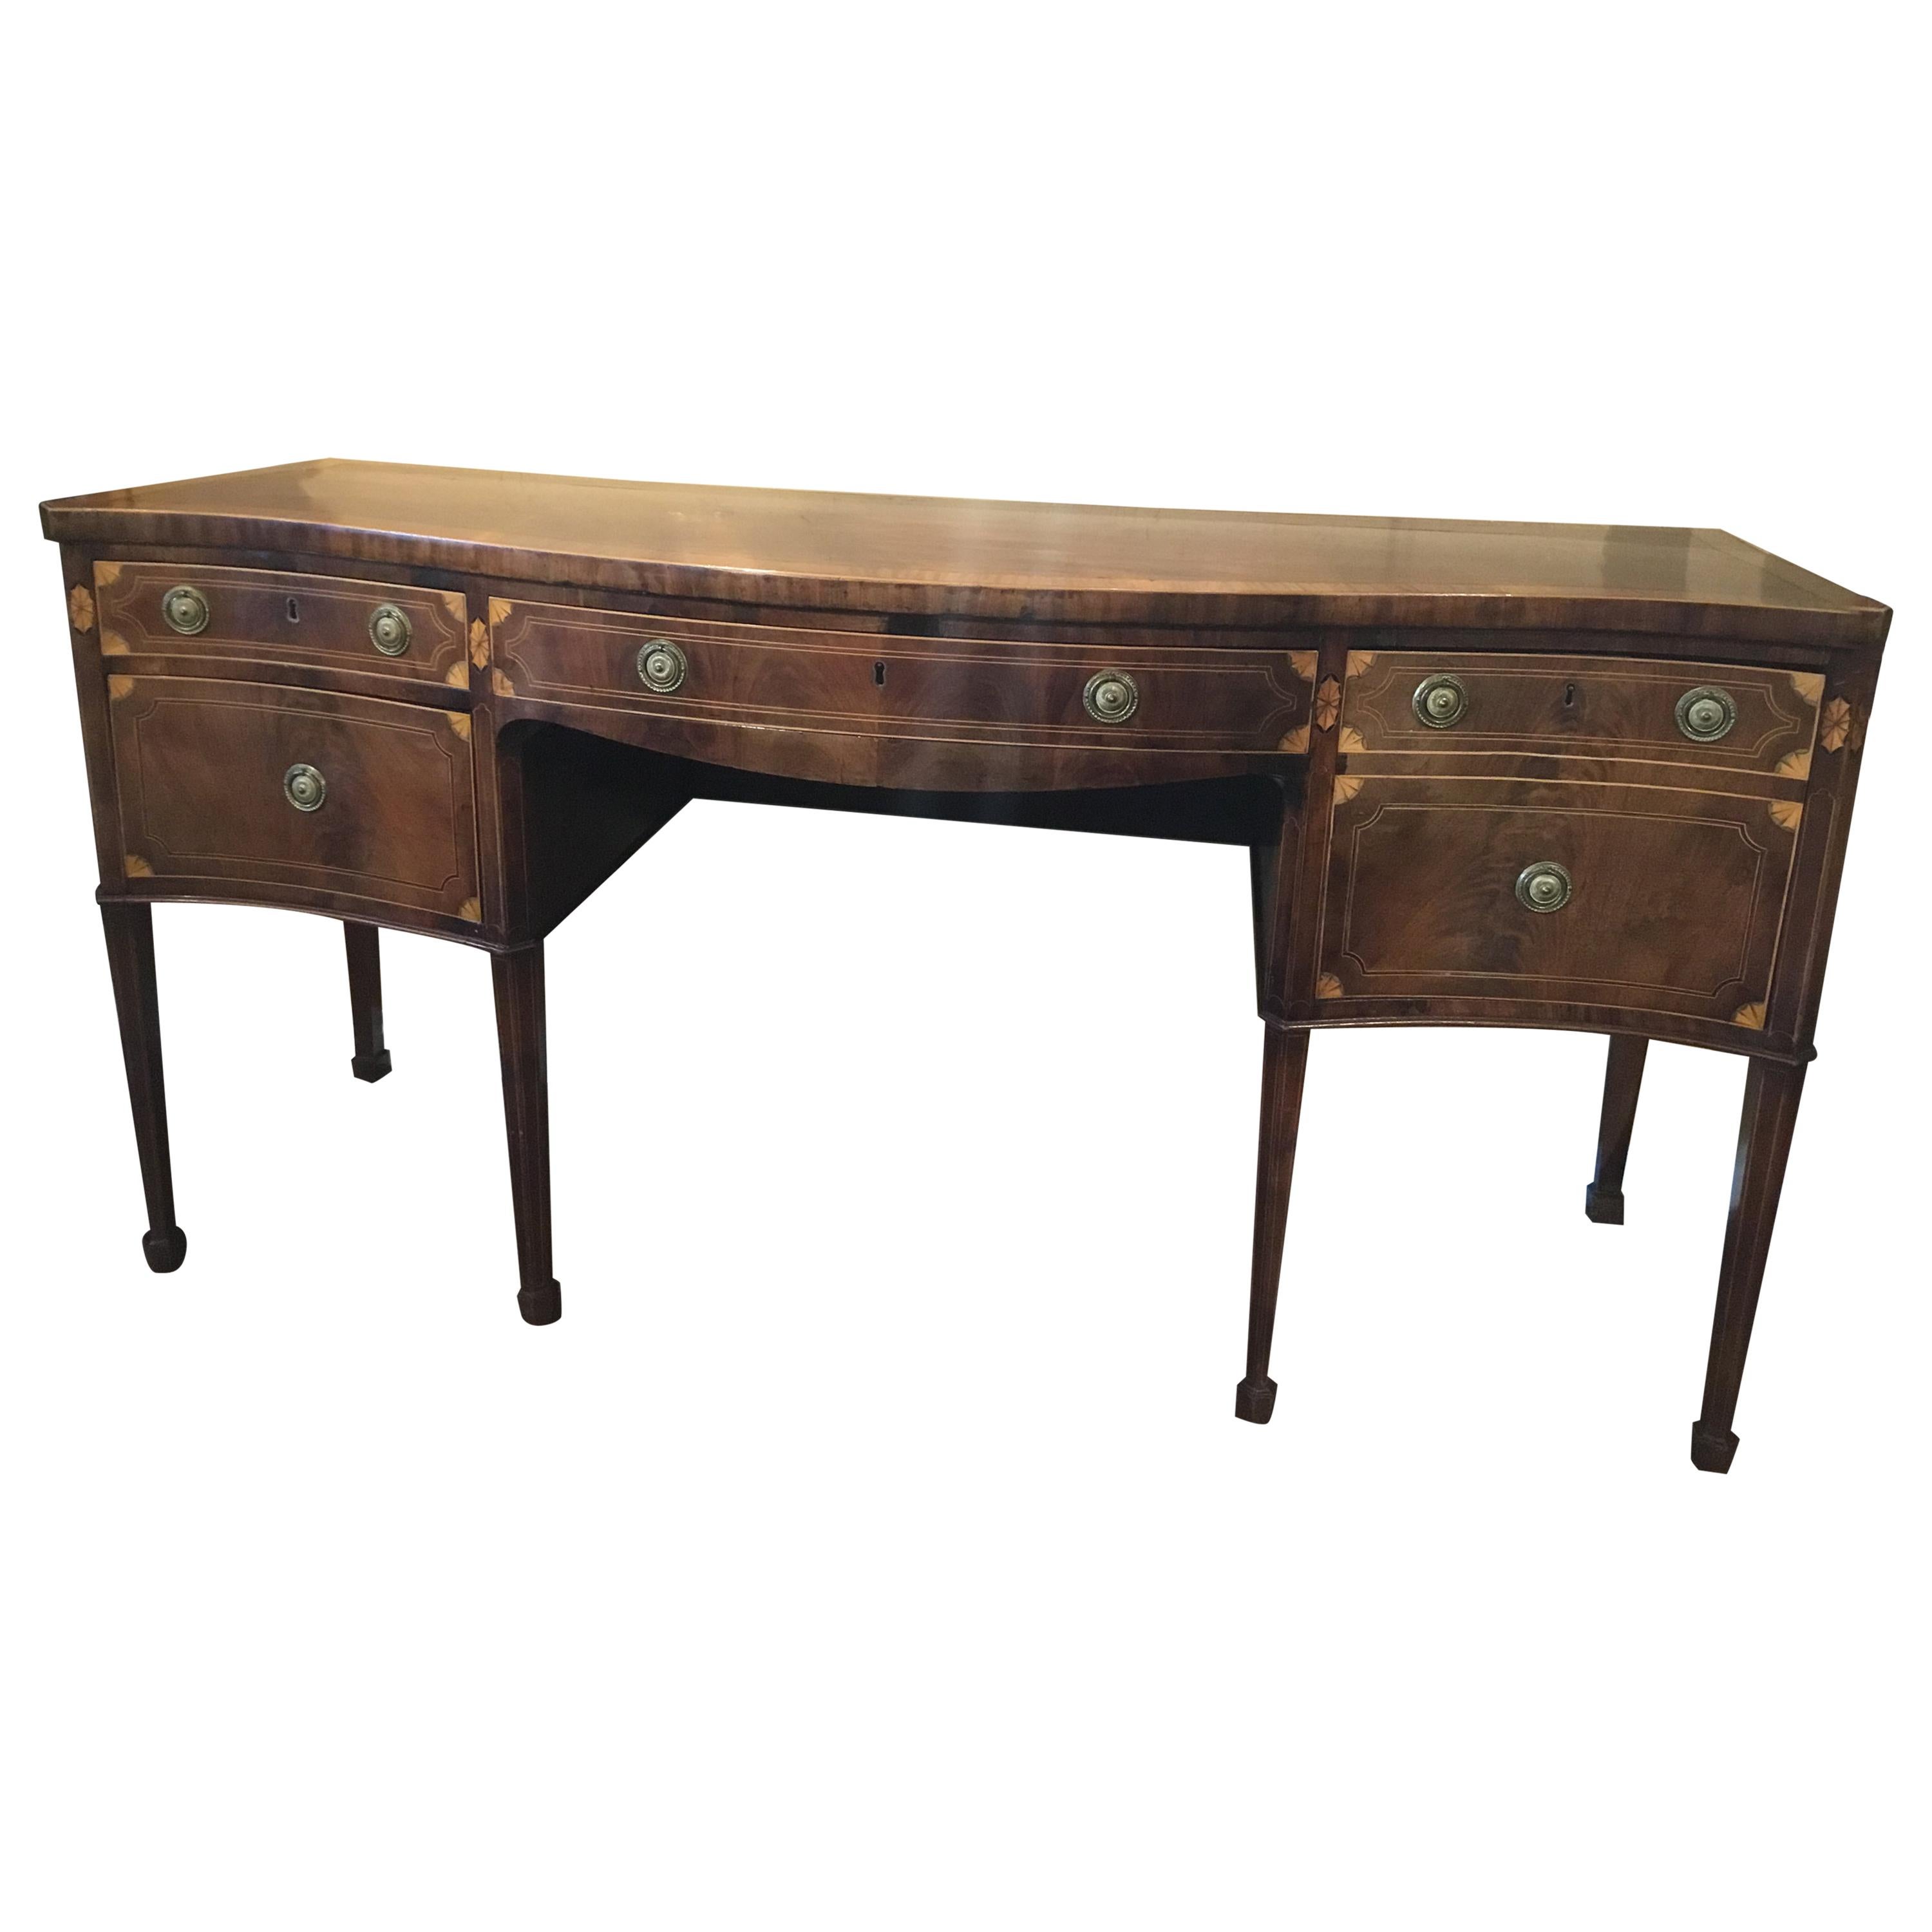 Mahogany Sheraton Style Sideboard, 18th Century with Satinwood Banding For Sale